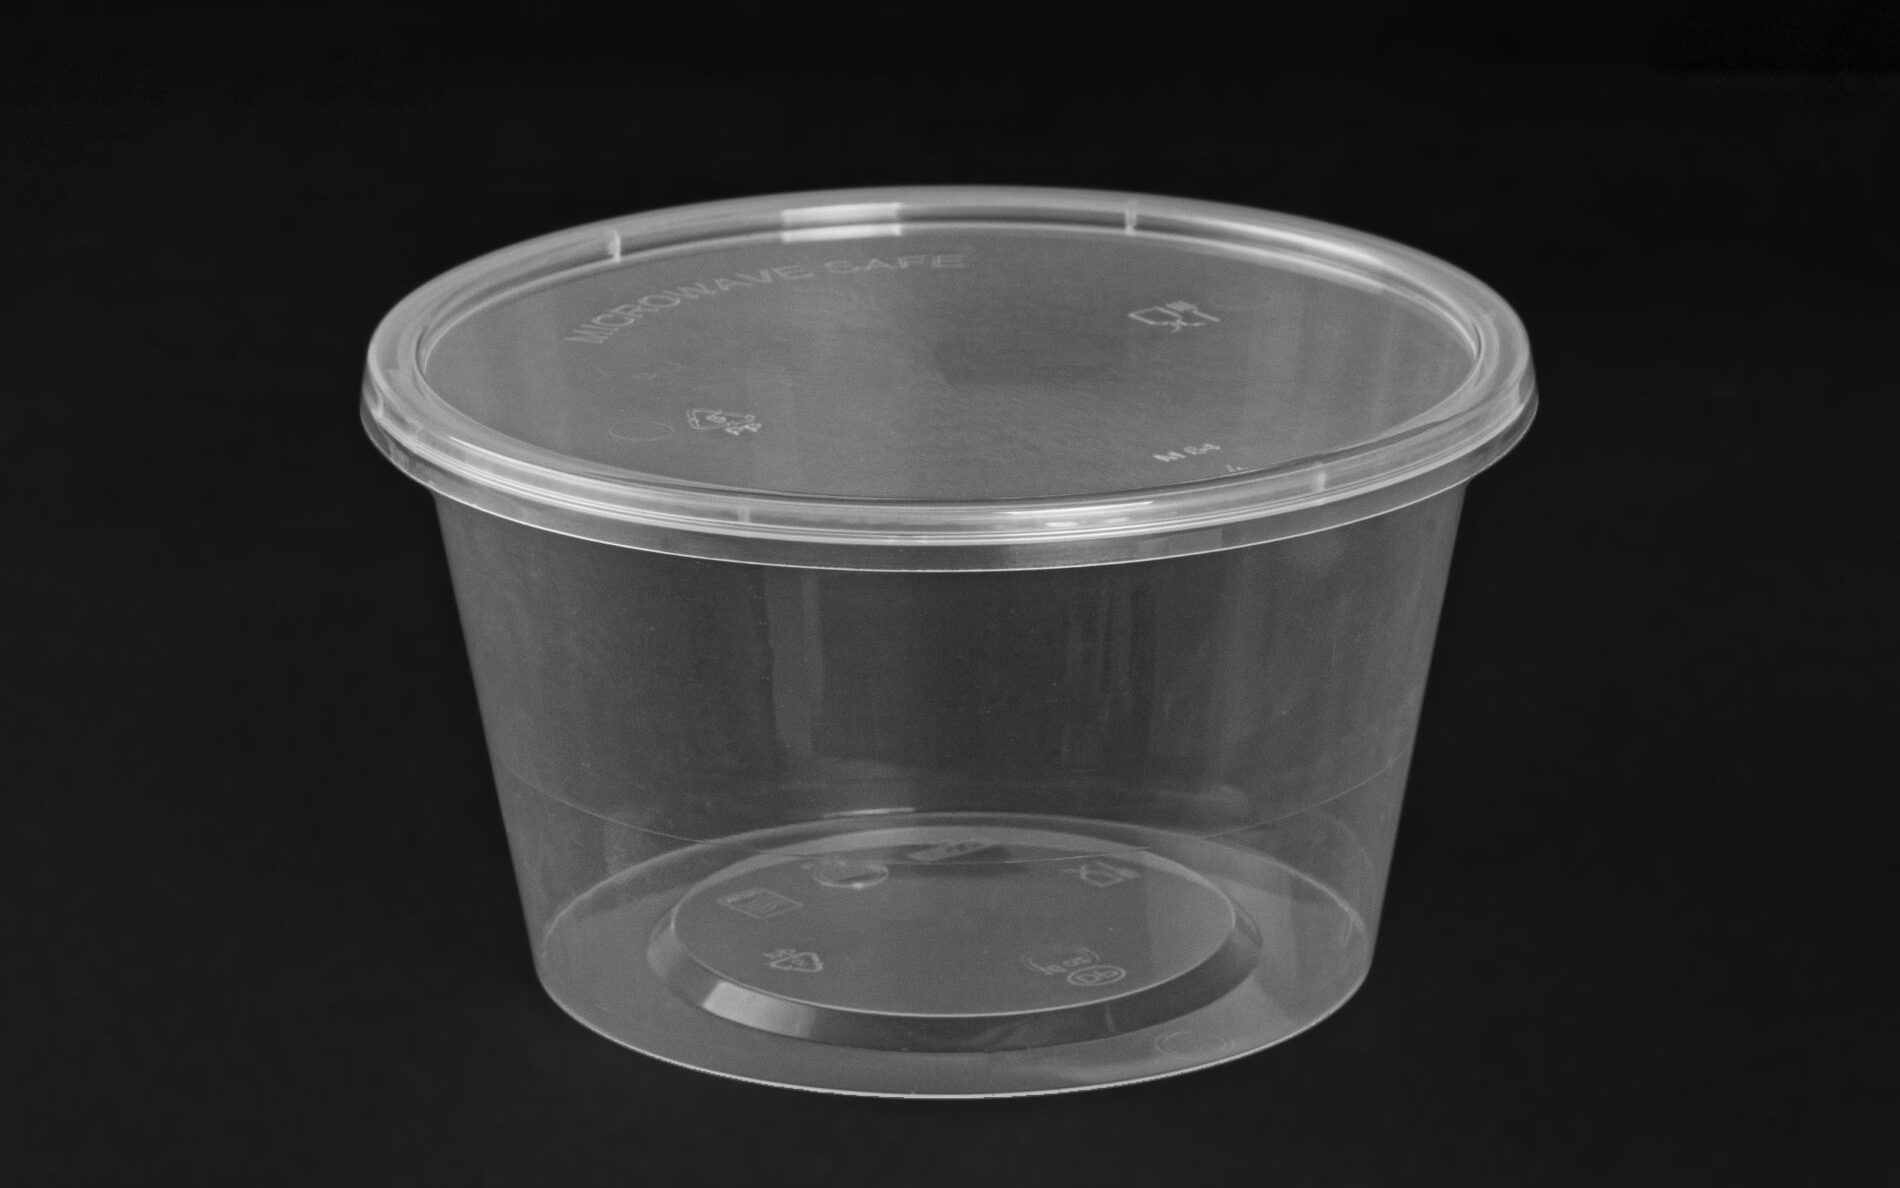 Damati 500 ml (16 Oz) Round Food Container by channel packaging 